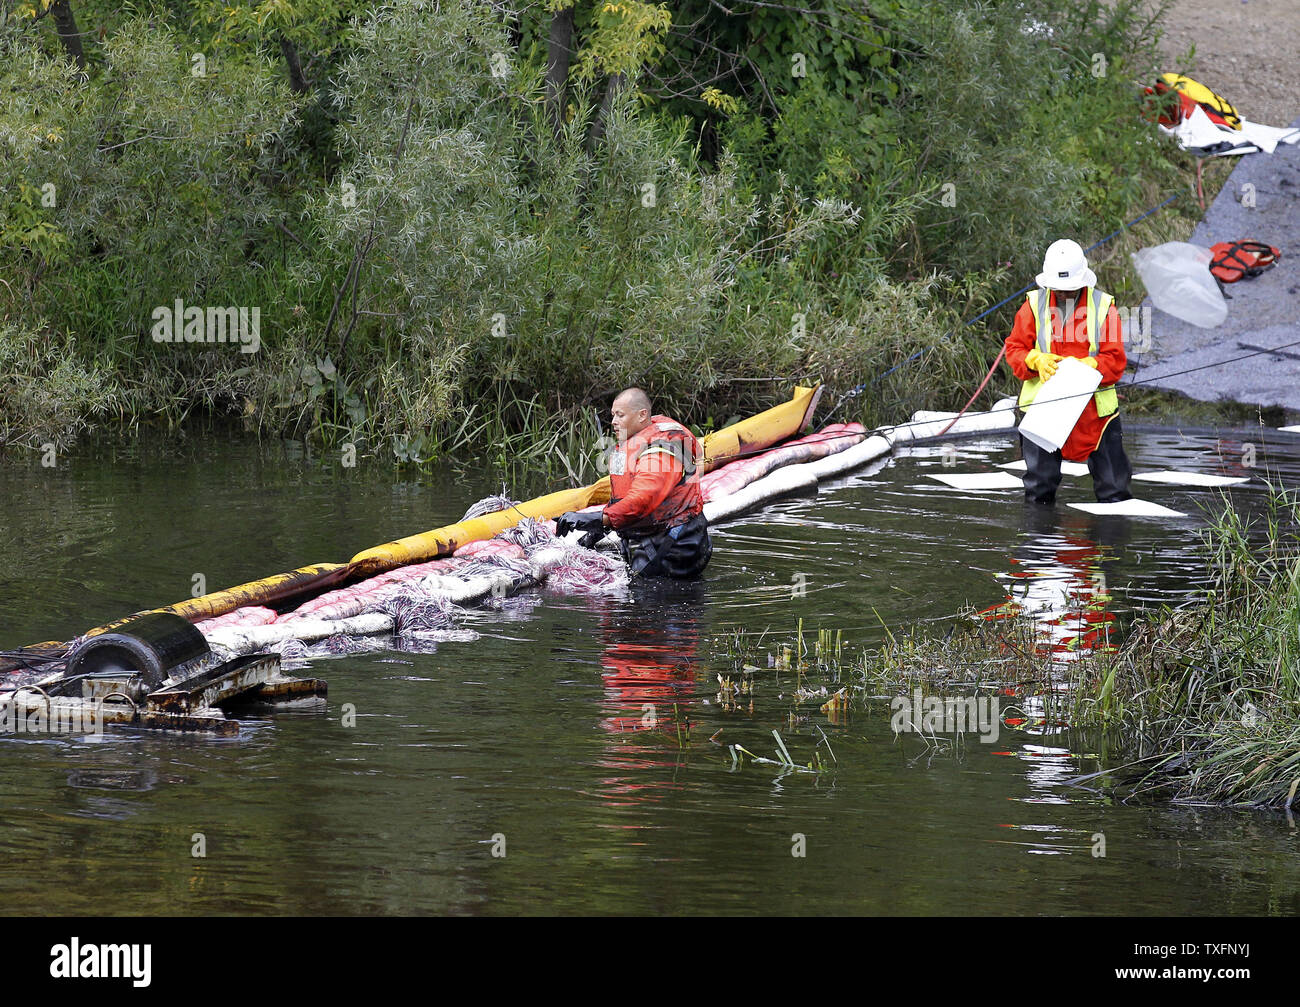 Crews work to clean up the Kalamazoo River near Battle Creek, Michigan on July 30, 2010. A 30-inch-diameter pipeline ruptured sometime between Sunday night and Monday morning, sending between 800,000 and 1 million gallons of oil into nearby Talmadge Creek and the Kalamazoo River.     UPI/Brian Kersey Stock Photo